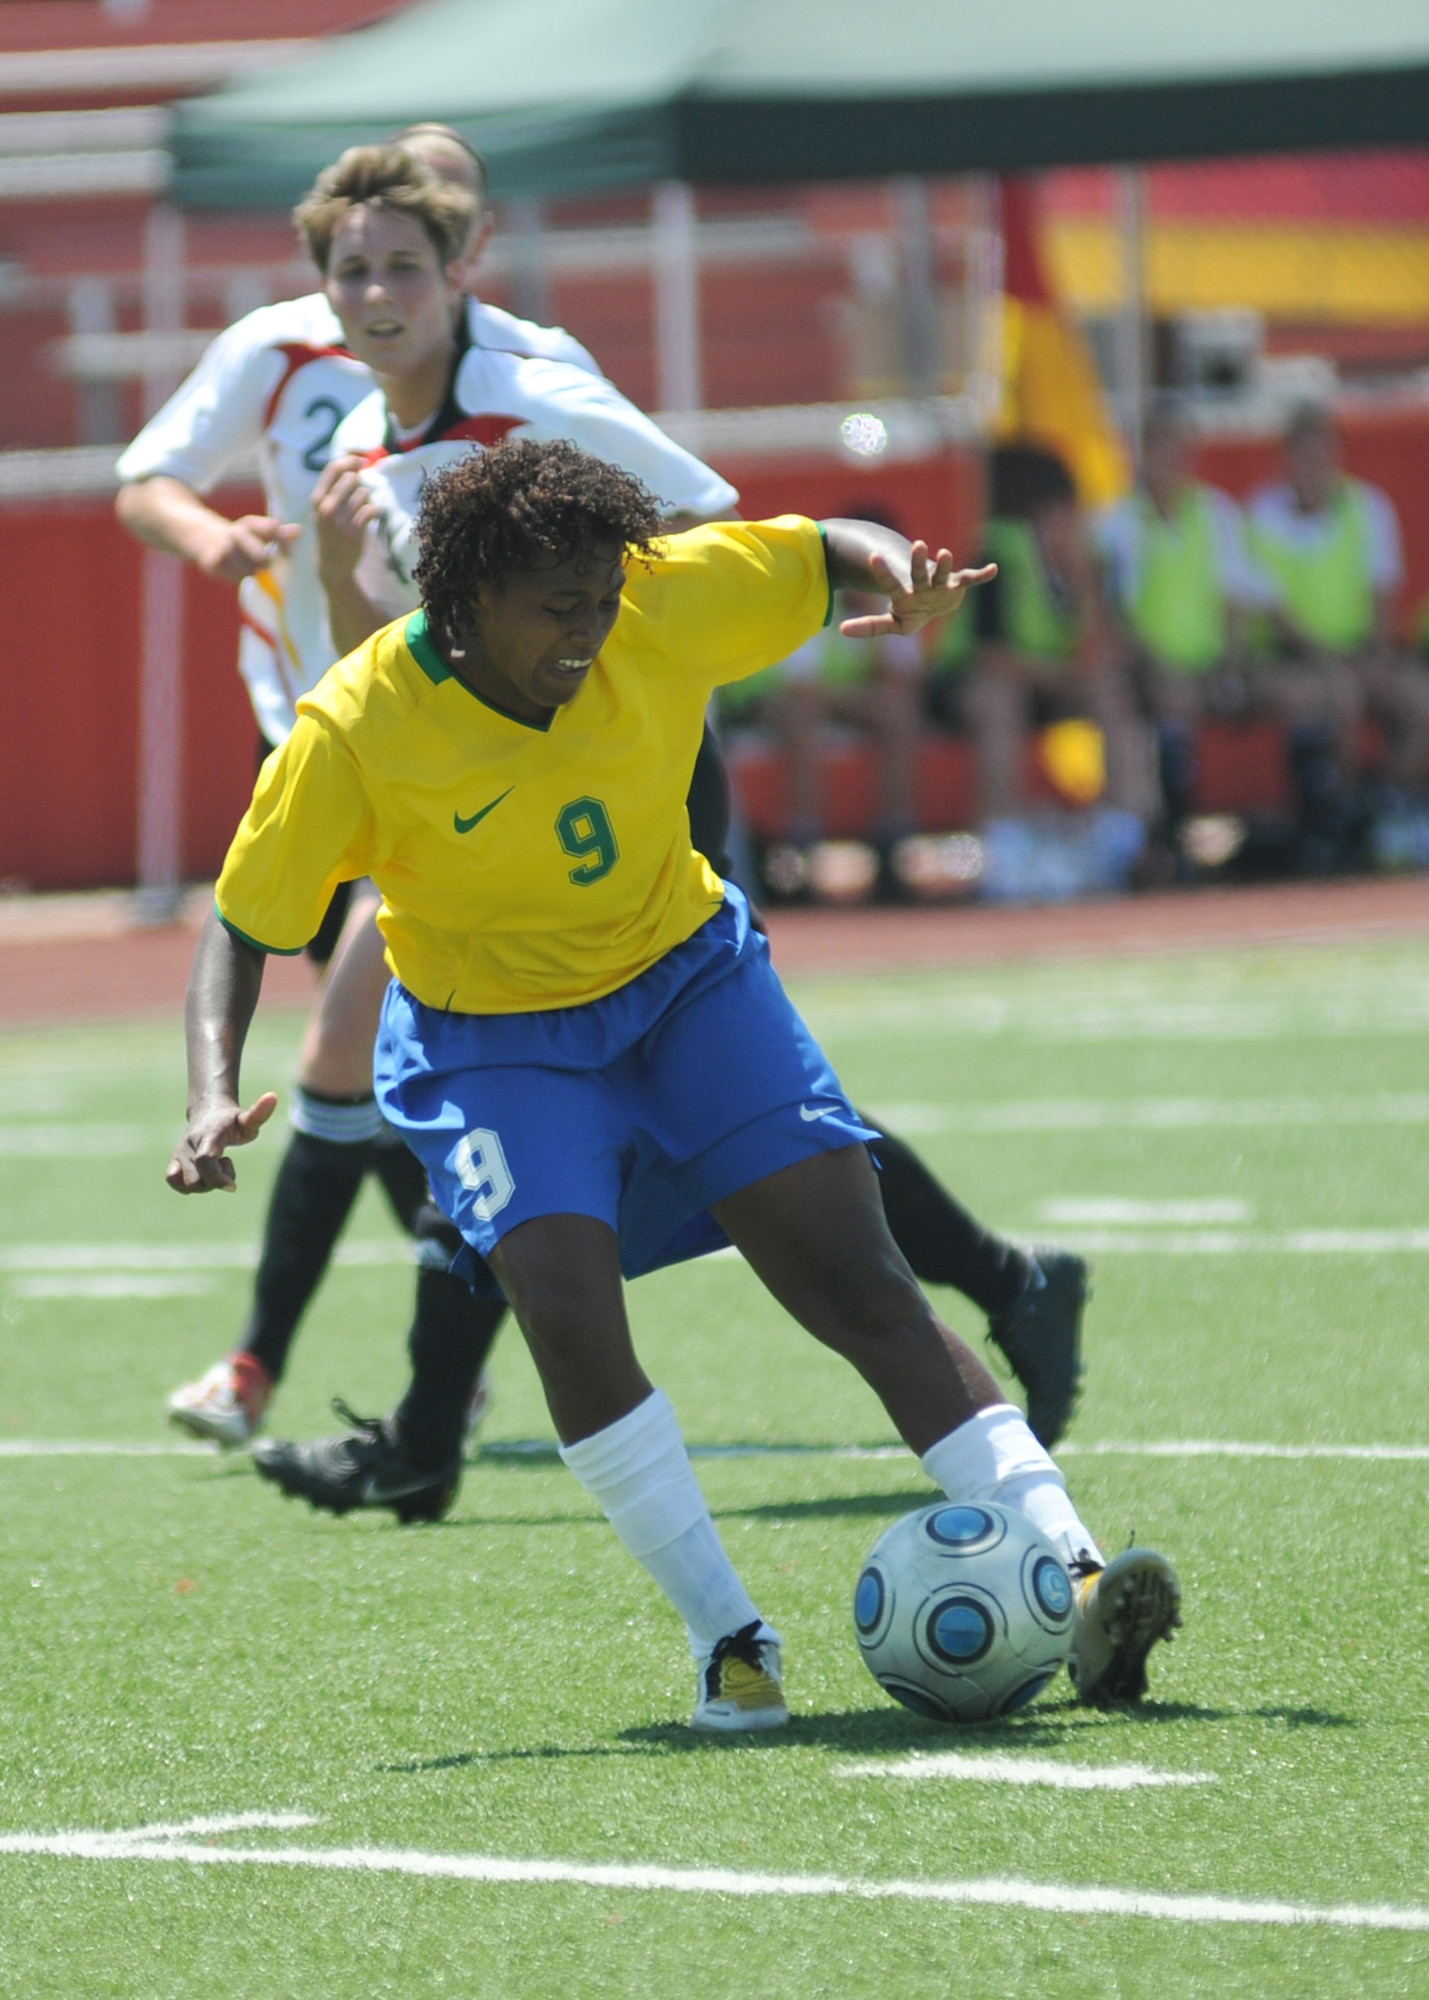 Germany and Brazil compete during the 5th CISM Women’s Soccer Championship at Biloxi High School Stadium 7 June.  The CISM tournament, hosted by Keesler Air Force Base, includes teams from Brazil, Canada, France, Germany, The Netherlands, The Republic of South Korea and the United States.  Matches are being held June 6 to 13, with the Gold match June 13 at 2 p.m.  Organizers say the tournament gives teams and people who attend a chance to develop bonds and life-long friendships between the countries and a chance to learn about one another’s cultural similarities and differences.  (U.S. Air Force photo by Kemberly Groue)